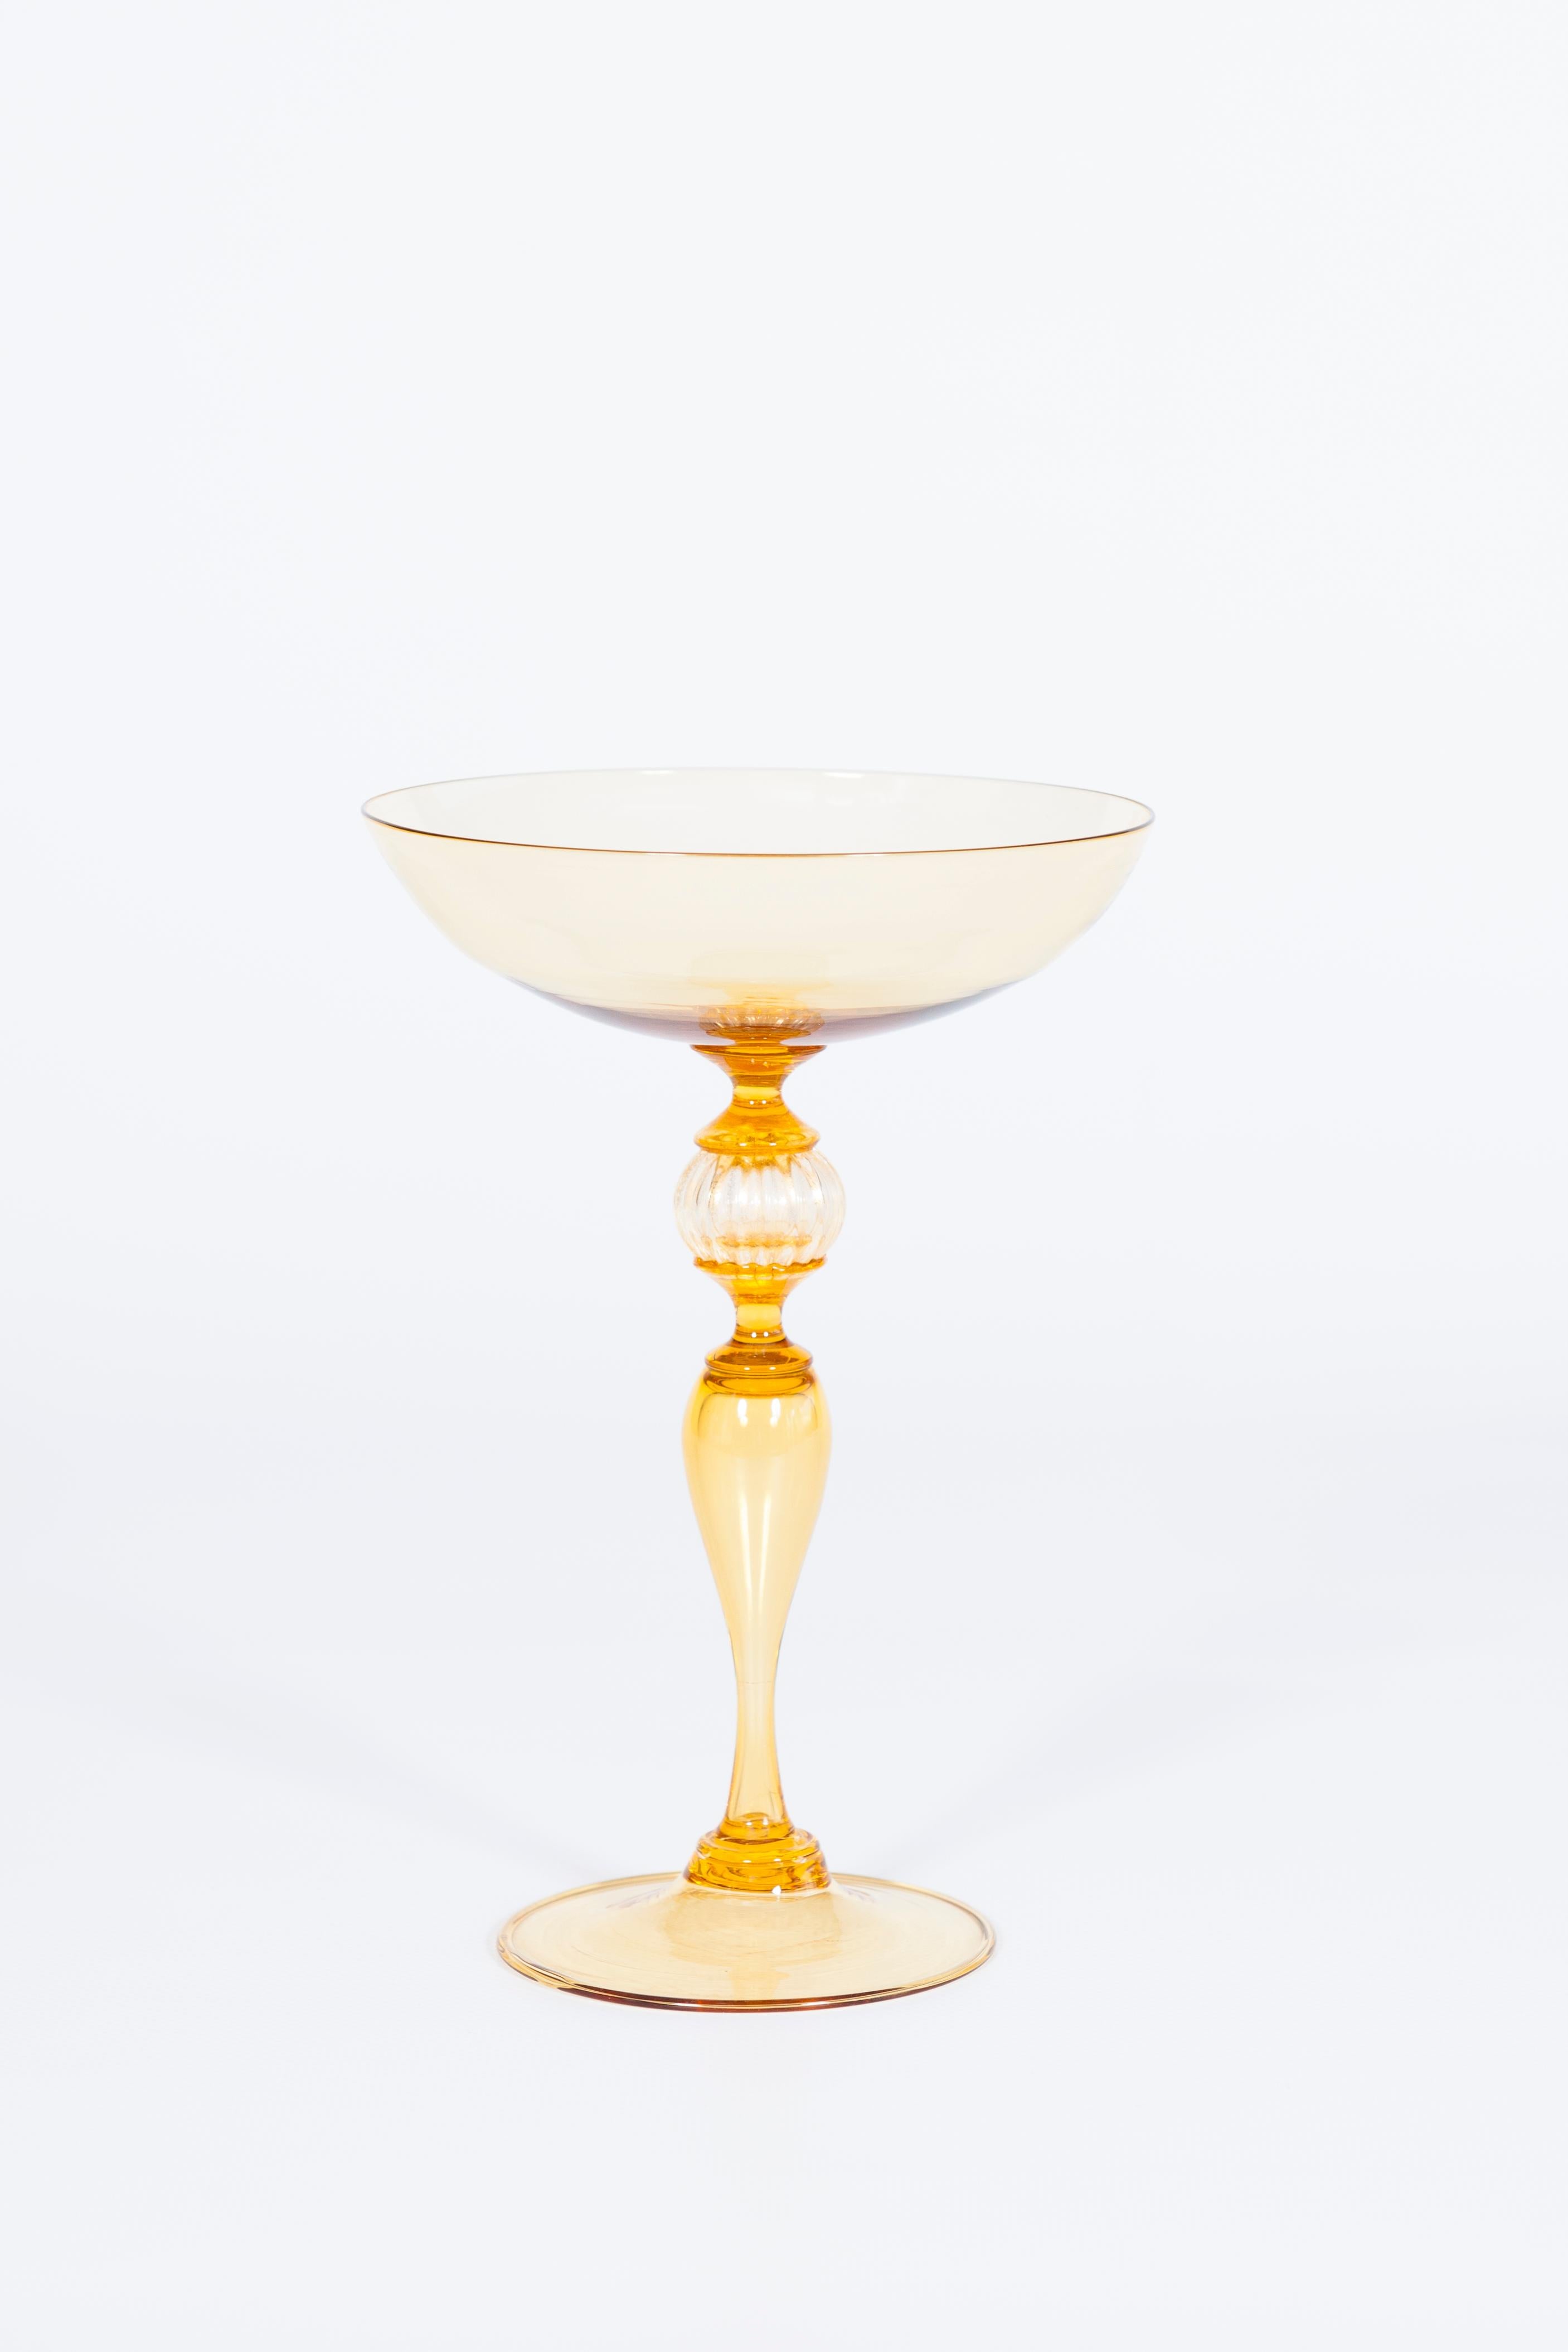 Decorative Stem Glass in Amber Murano Glass with Gold Leaf Italy Venice 1970s.
Entirely handcrafted of blown glass and gold leaf in the 1970s, this elegant stem glass comes from Murano, the Venetian island dedicated to the production of blown glass